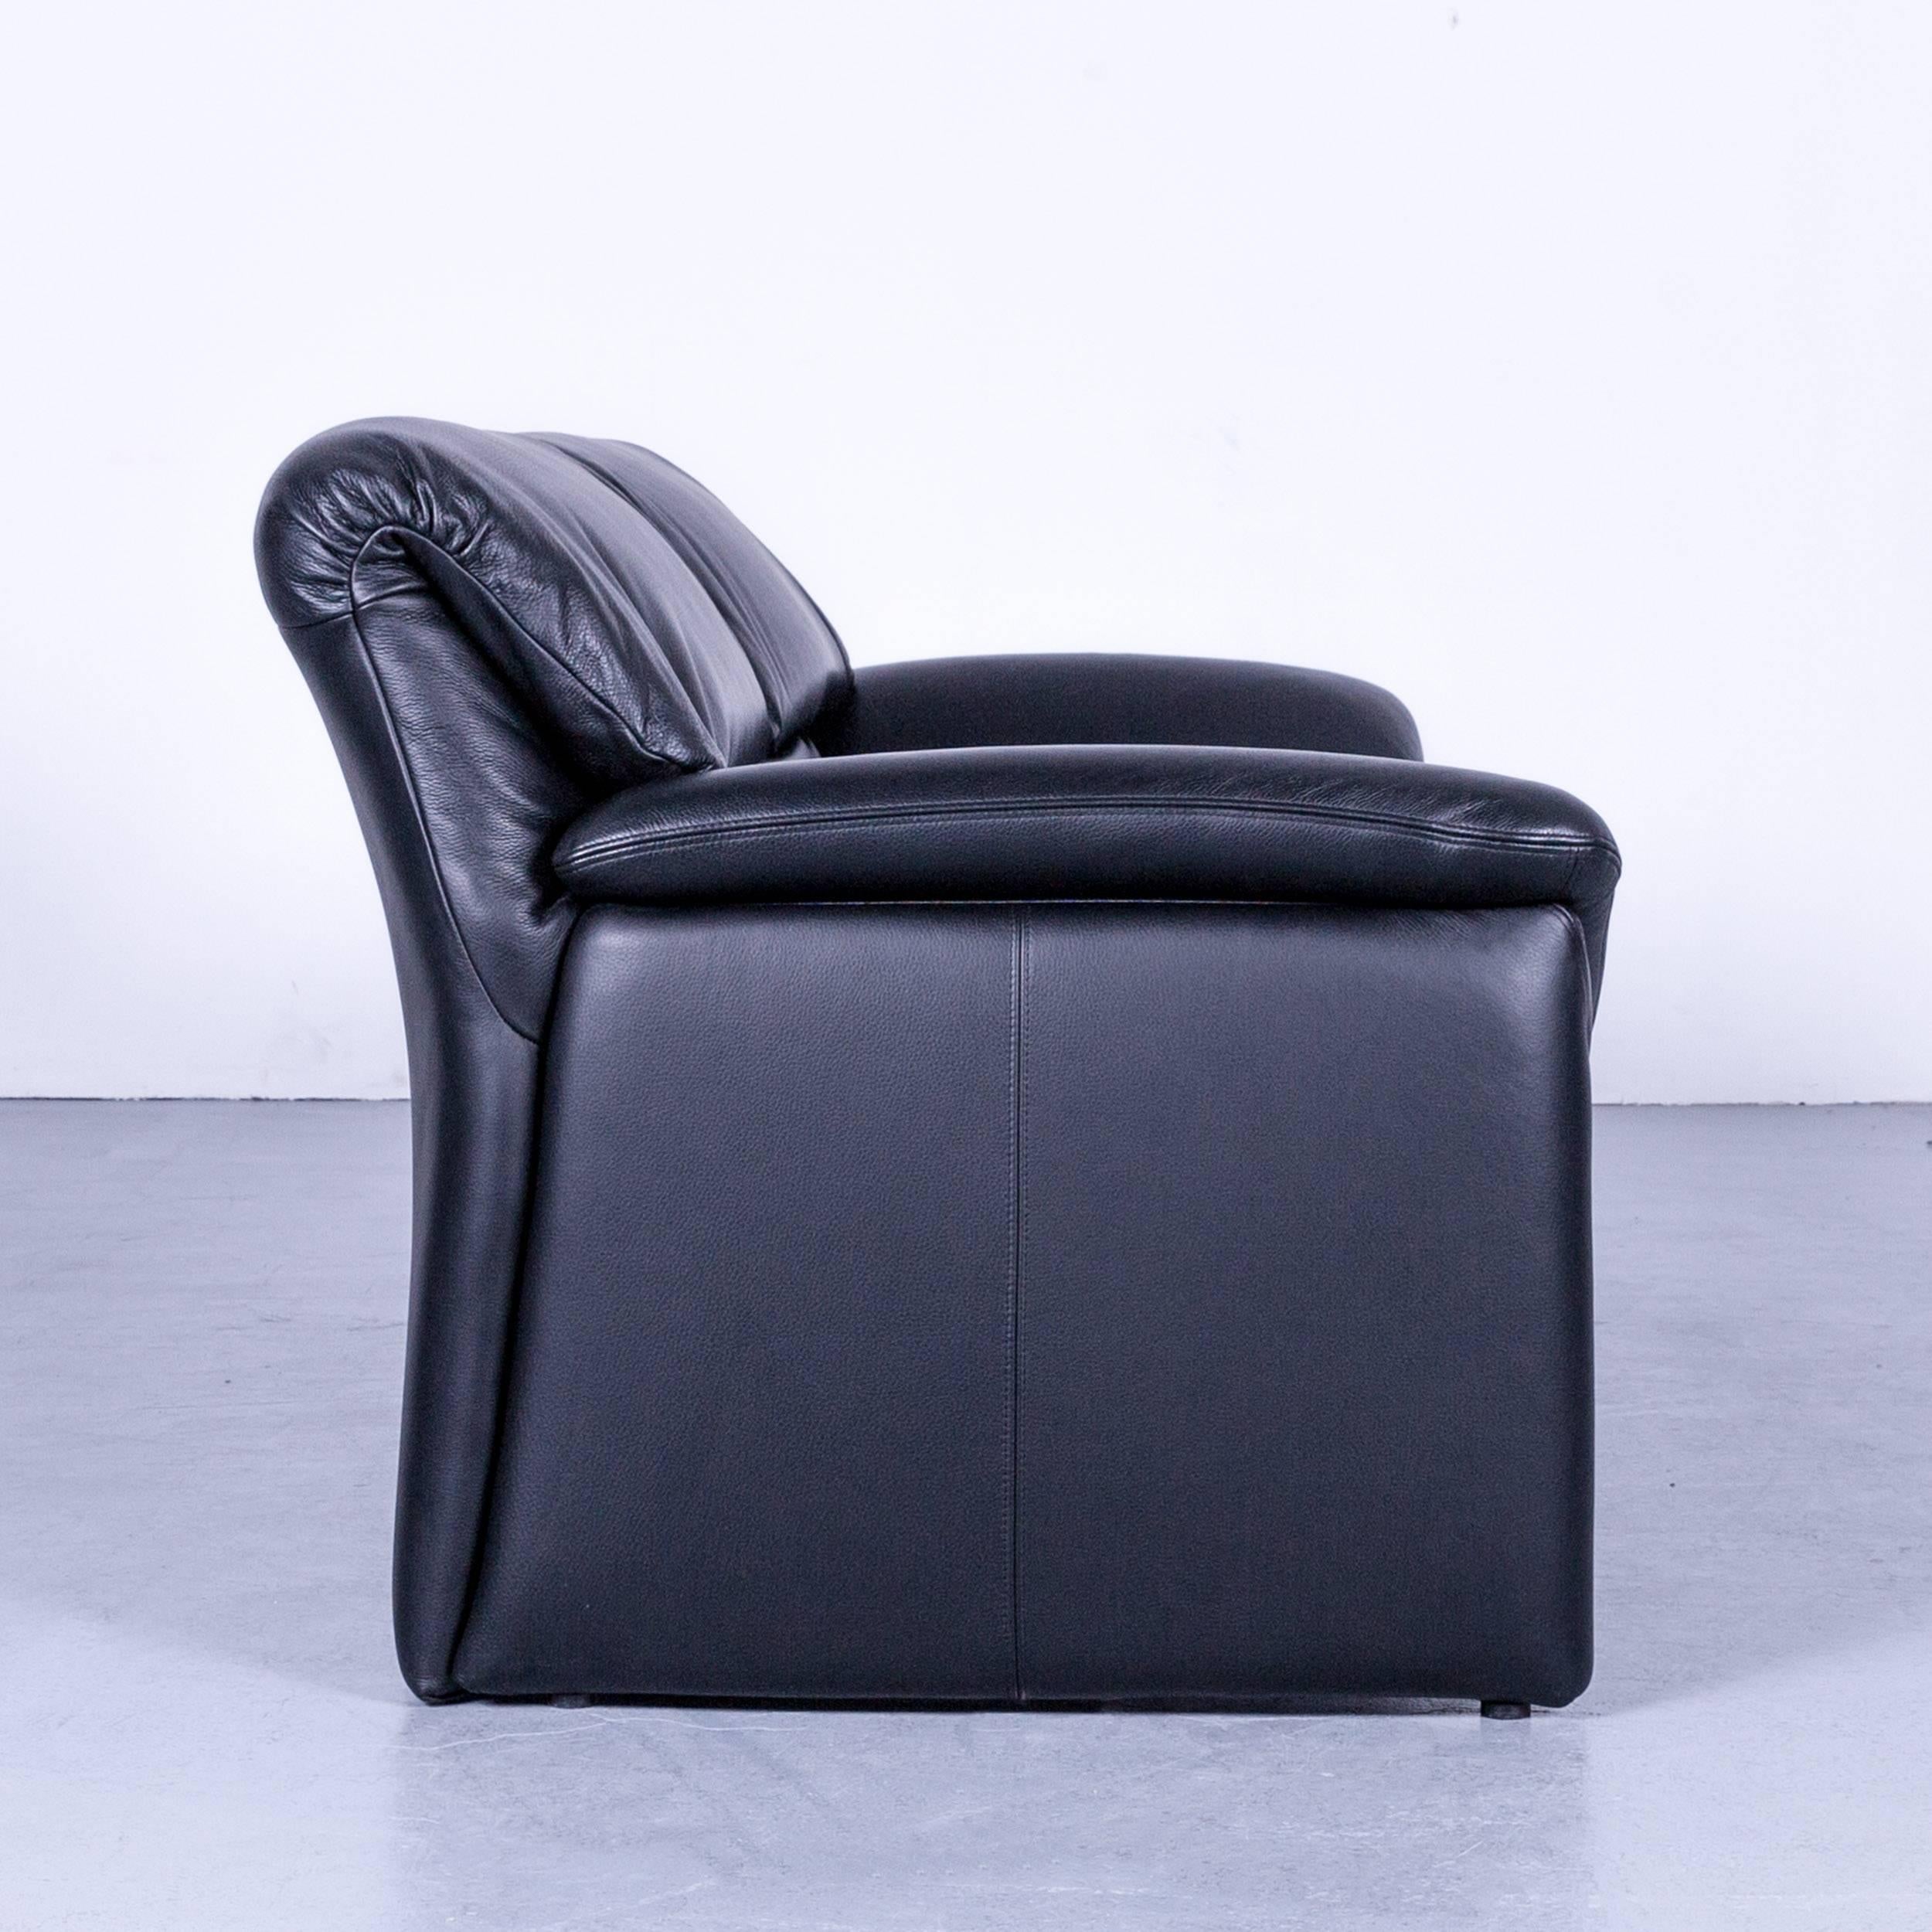 De Sede by Hans Kaufeld Designer Sofa Black Leather Two-Seat Function Modern For Sale 2